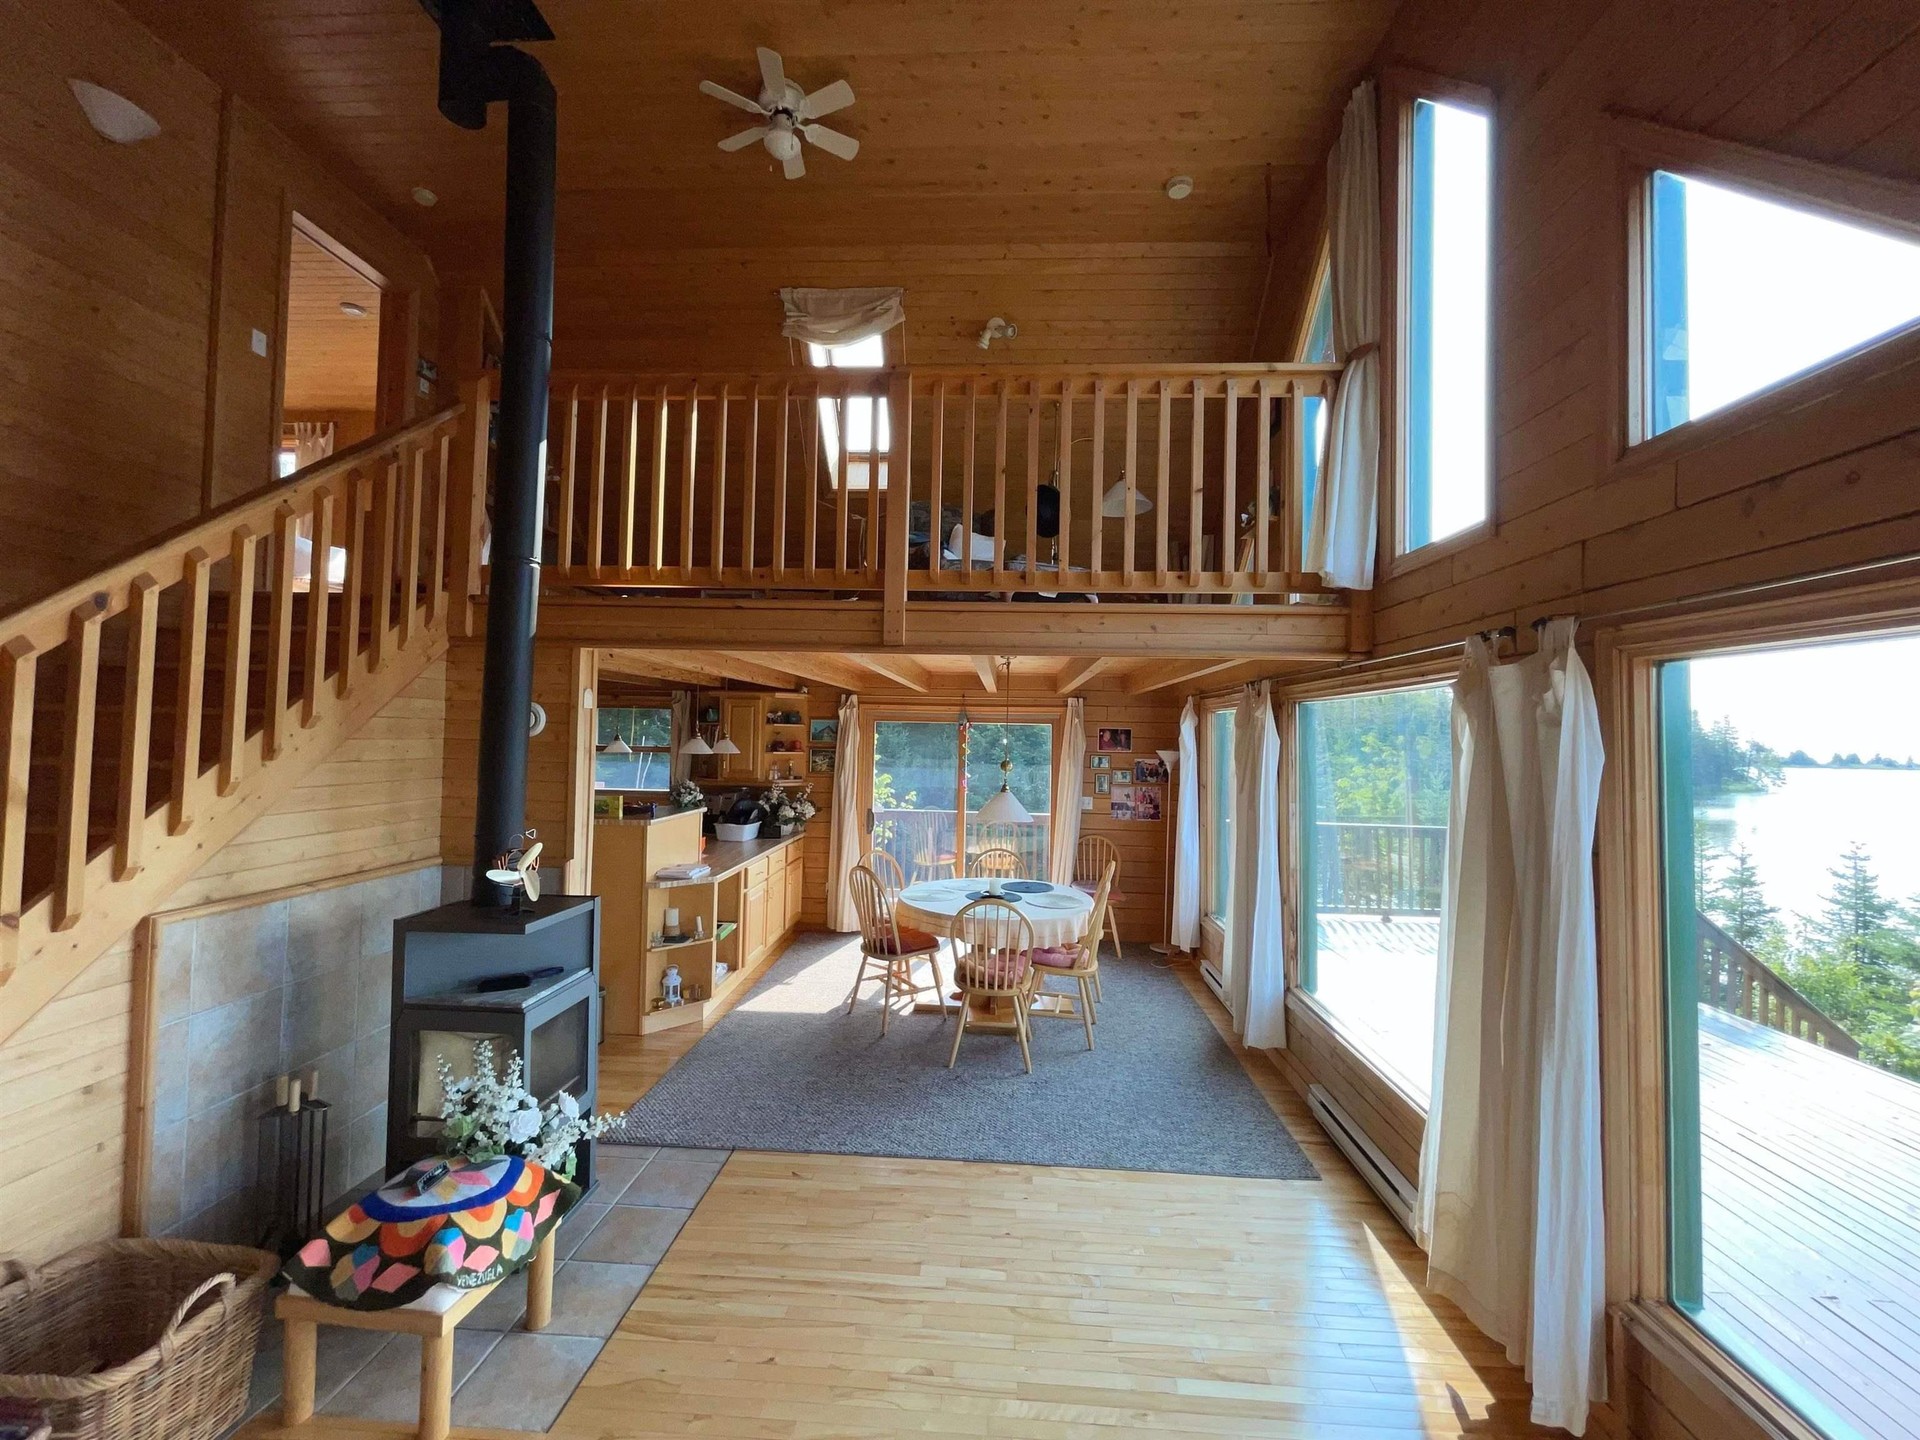 Chalet & Guest Cottage on the Bras d'Or Lake in Cape Breton